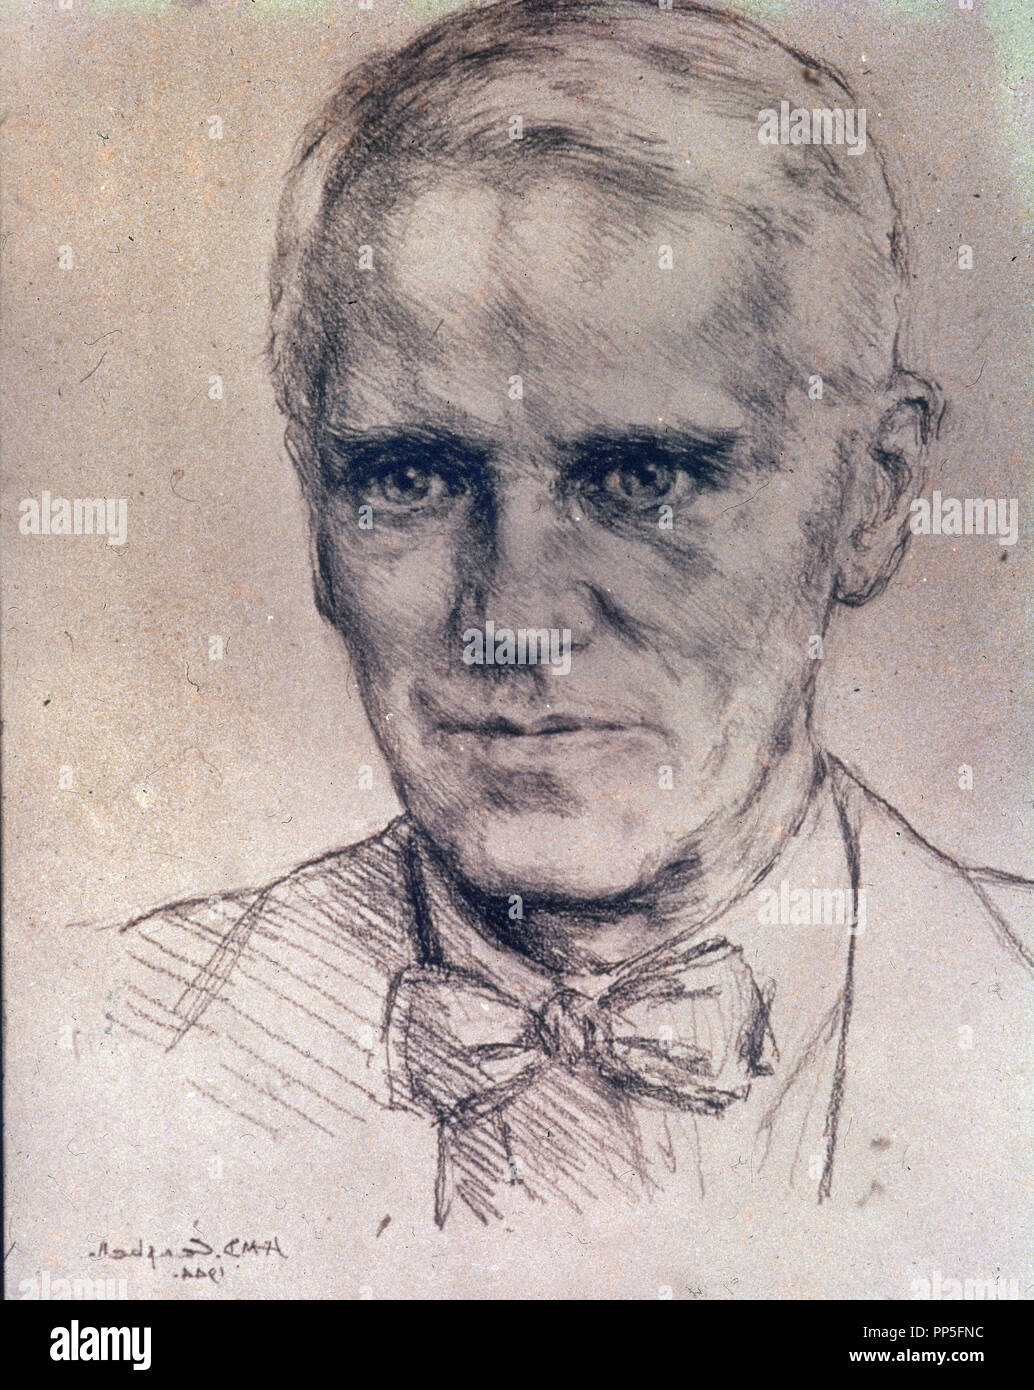 ALEXANDER FLEMING (1881-1955) - Scottish physician, microbiologist, and pharmacologist. Stock Photo